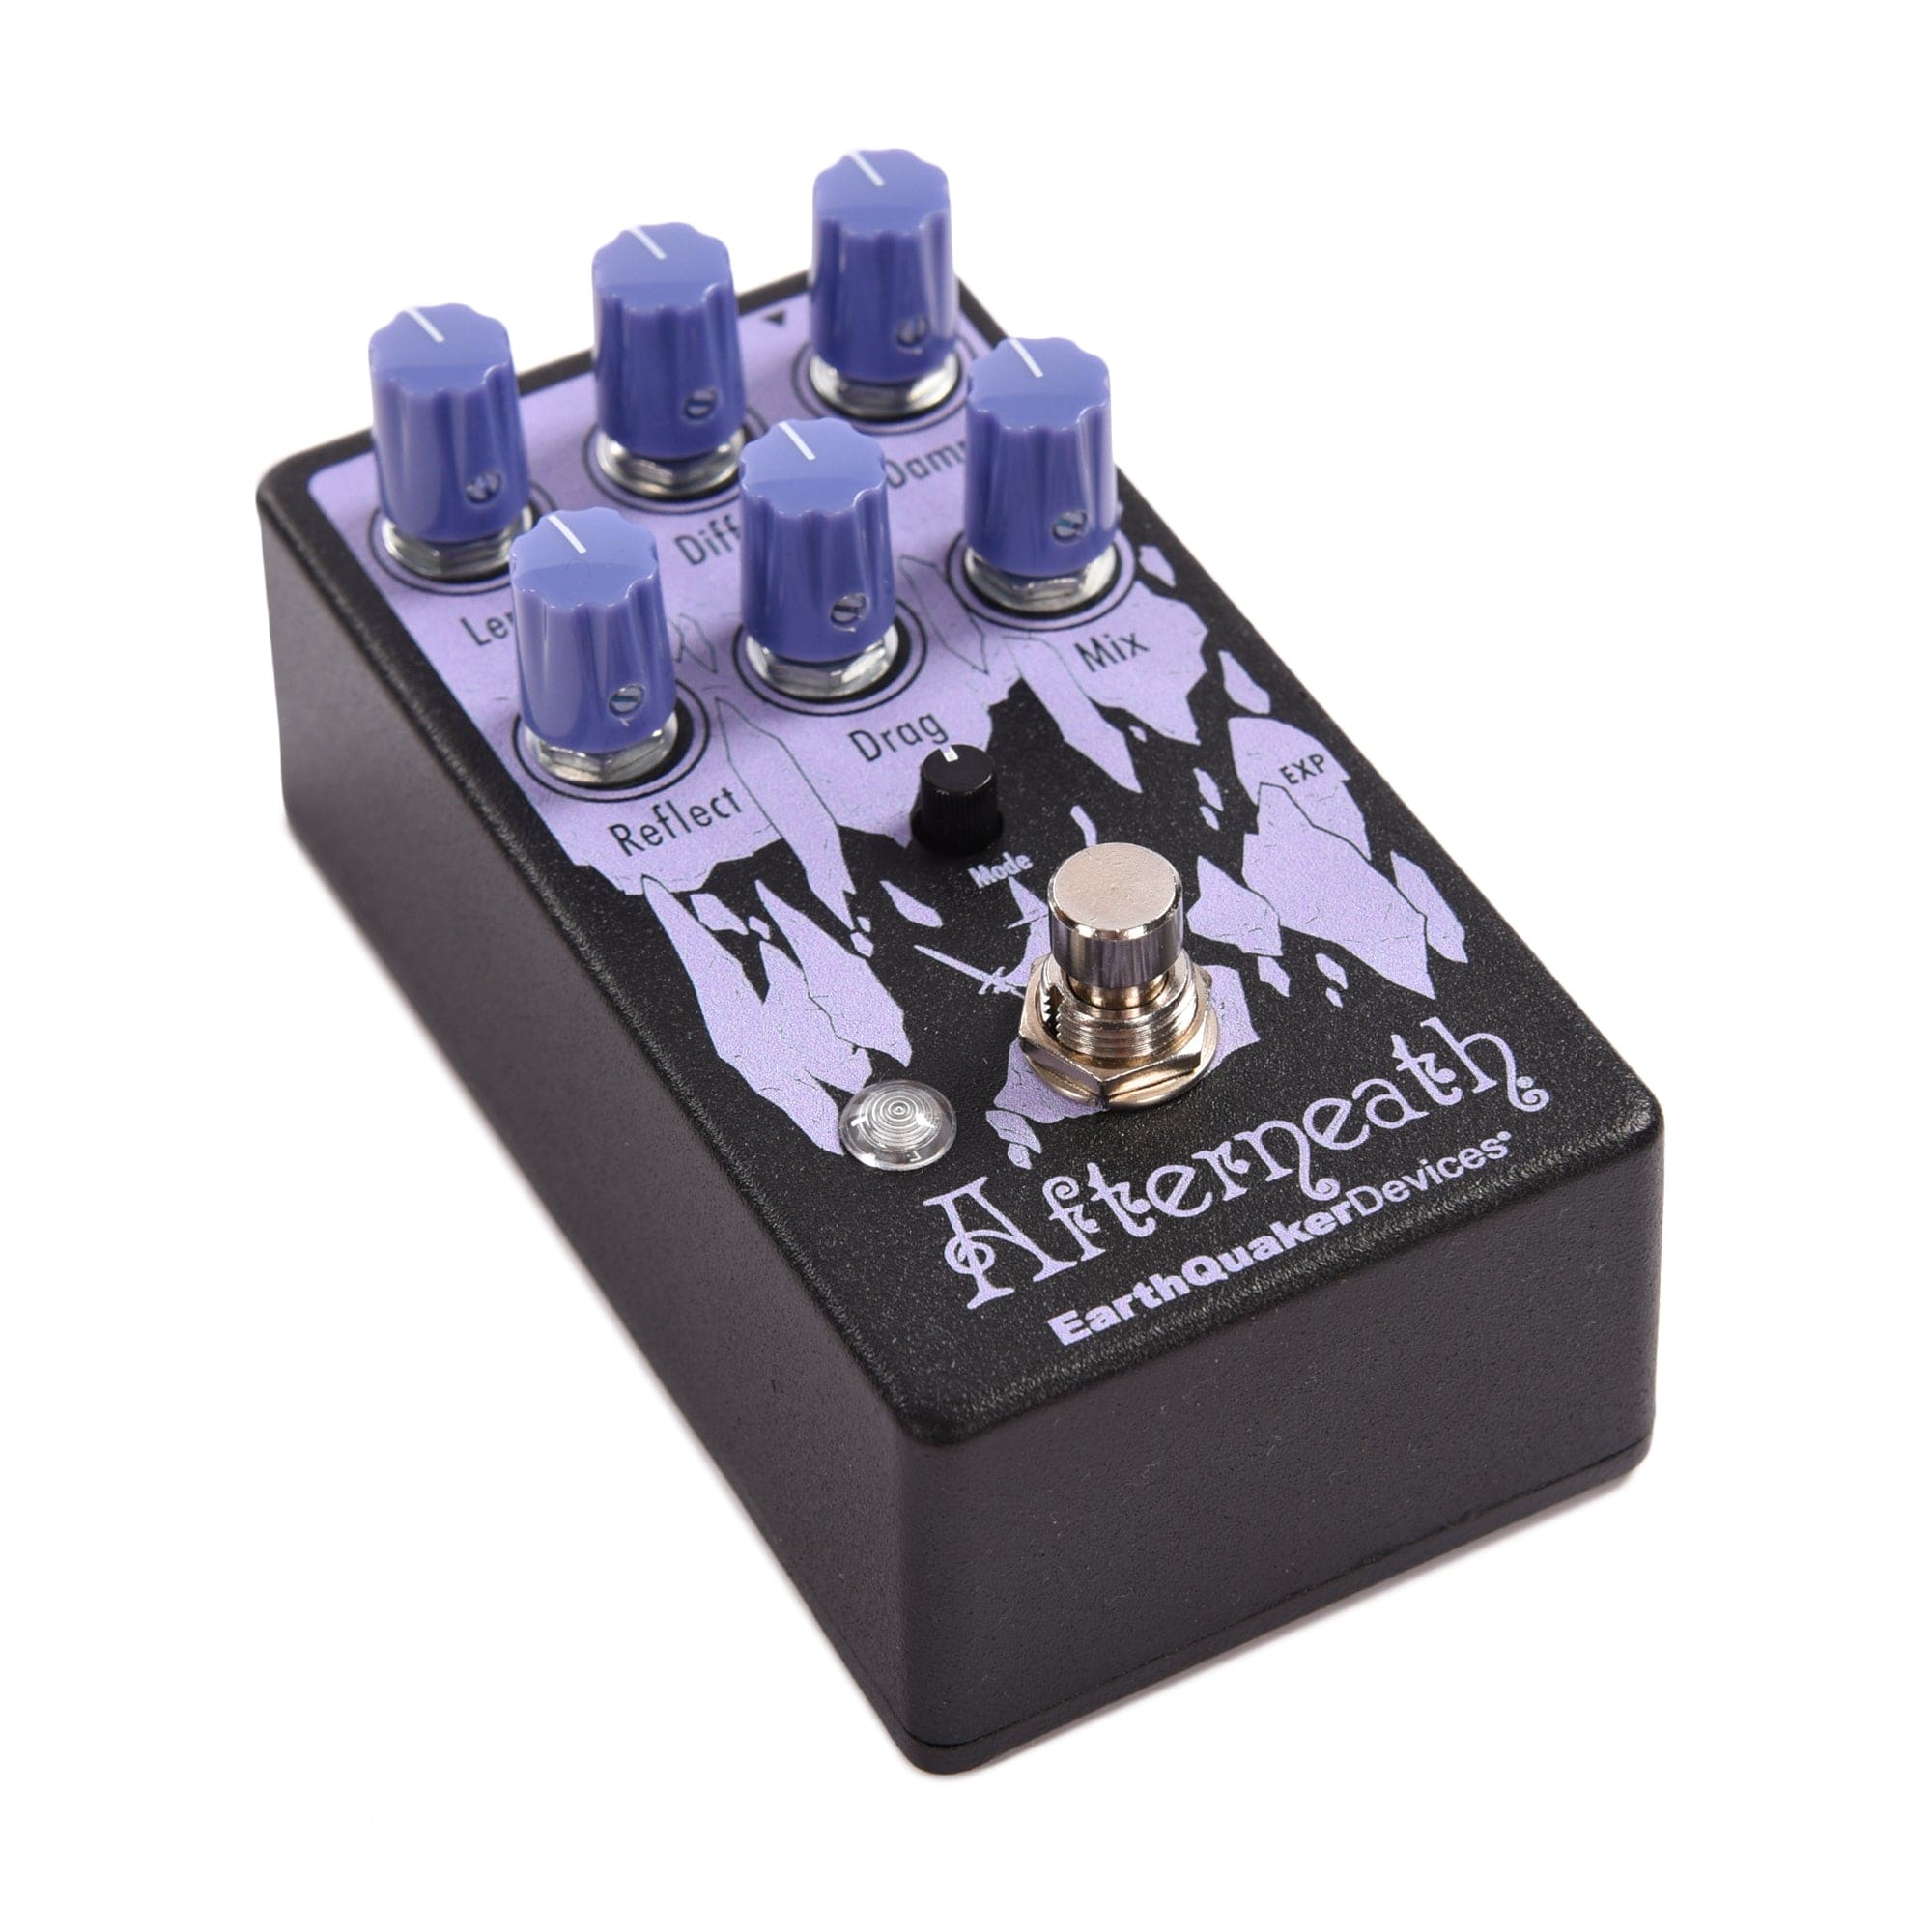 Earthquaker Devices Afterneath v3 Enhanced Otherworldly Reverberation Machine Black & Pastel Purple Effects and Pedals / Reverb